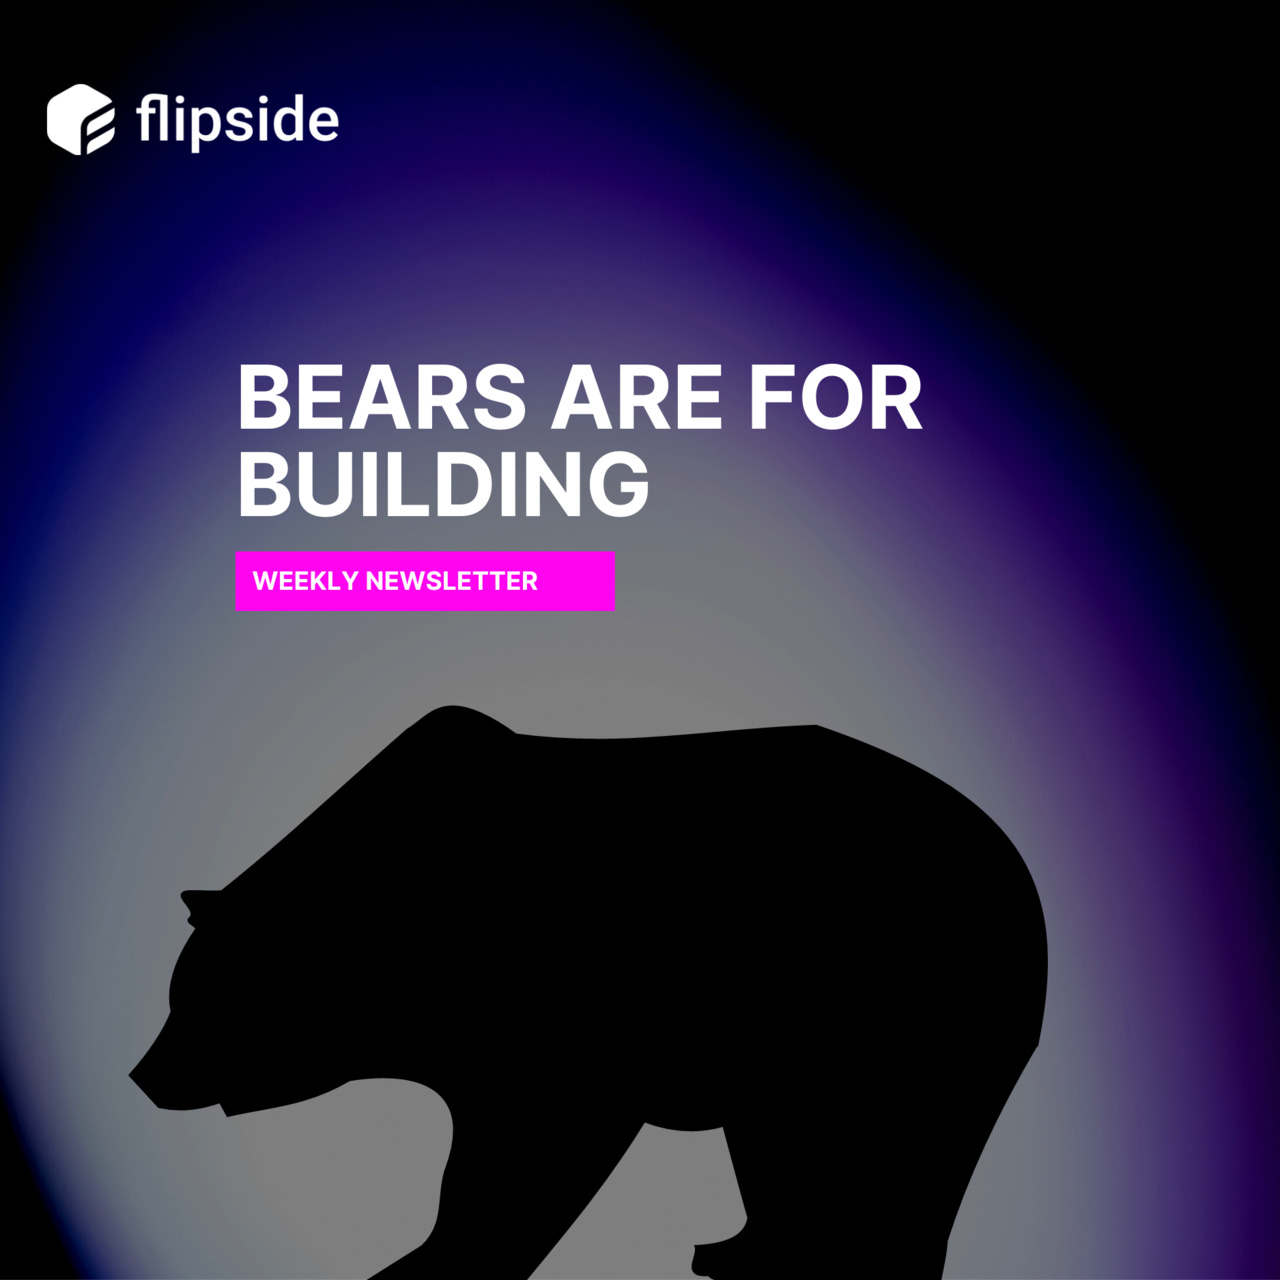 Bears are for building